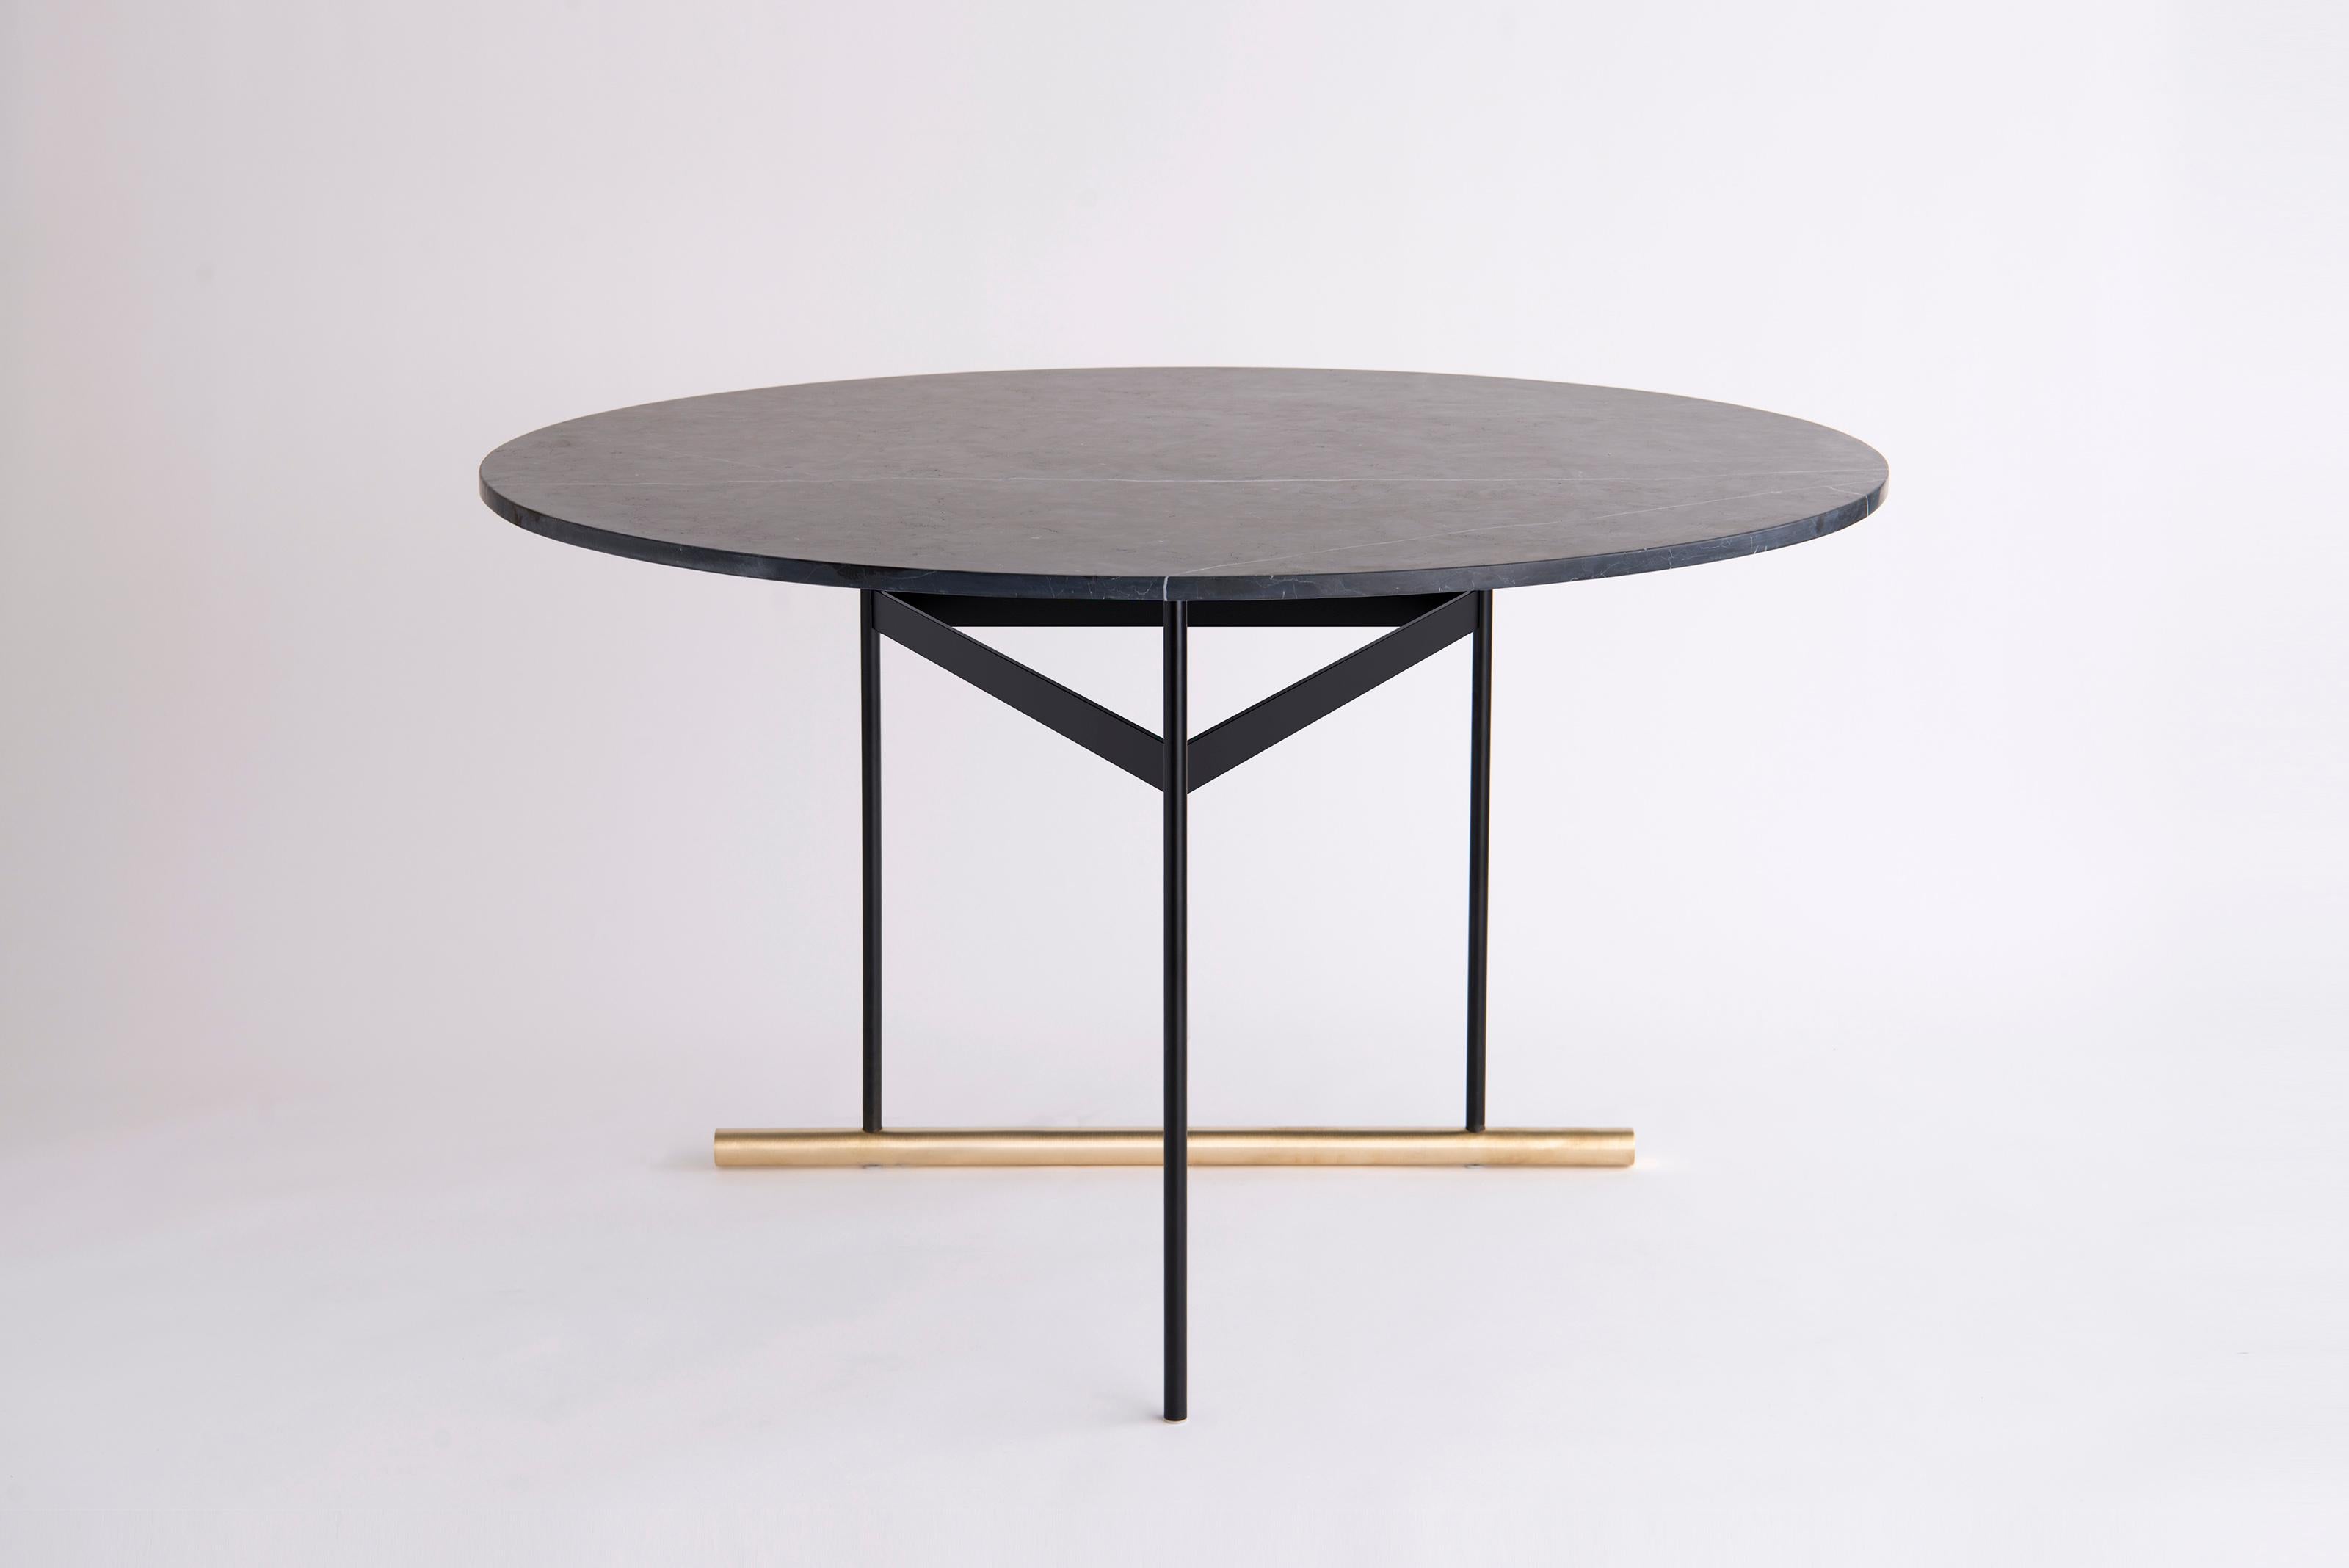 Icon Negro Marquina Dining Table by Phase Design
Dimensions: Ø 122 x H 74.3 cm. 
Materials: Negro Marquina marble, powder-coated metal and brushed brass.

Solid steel and brass with glass, marble, or solid wooden tops. Steel bar available in a flat